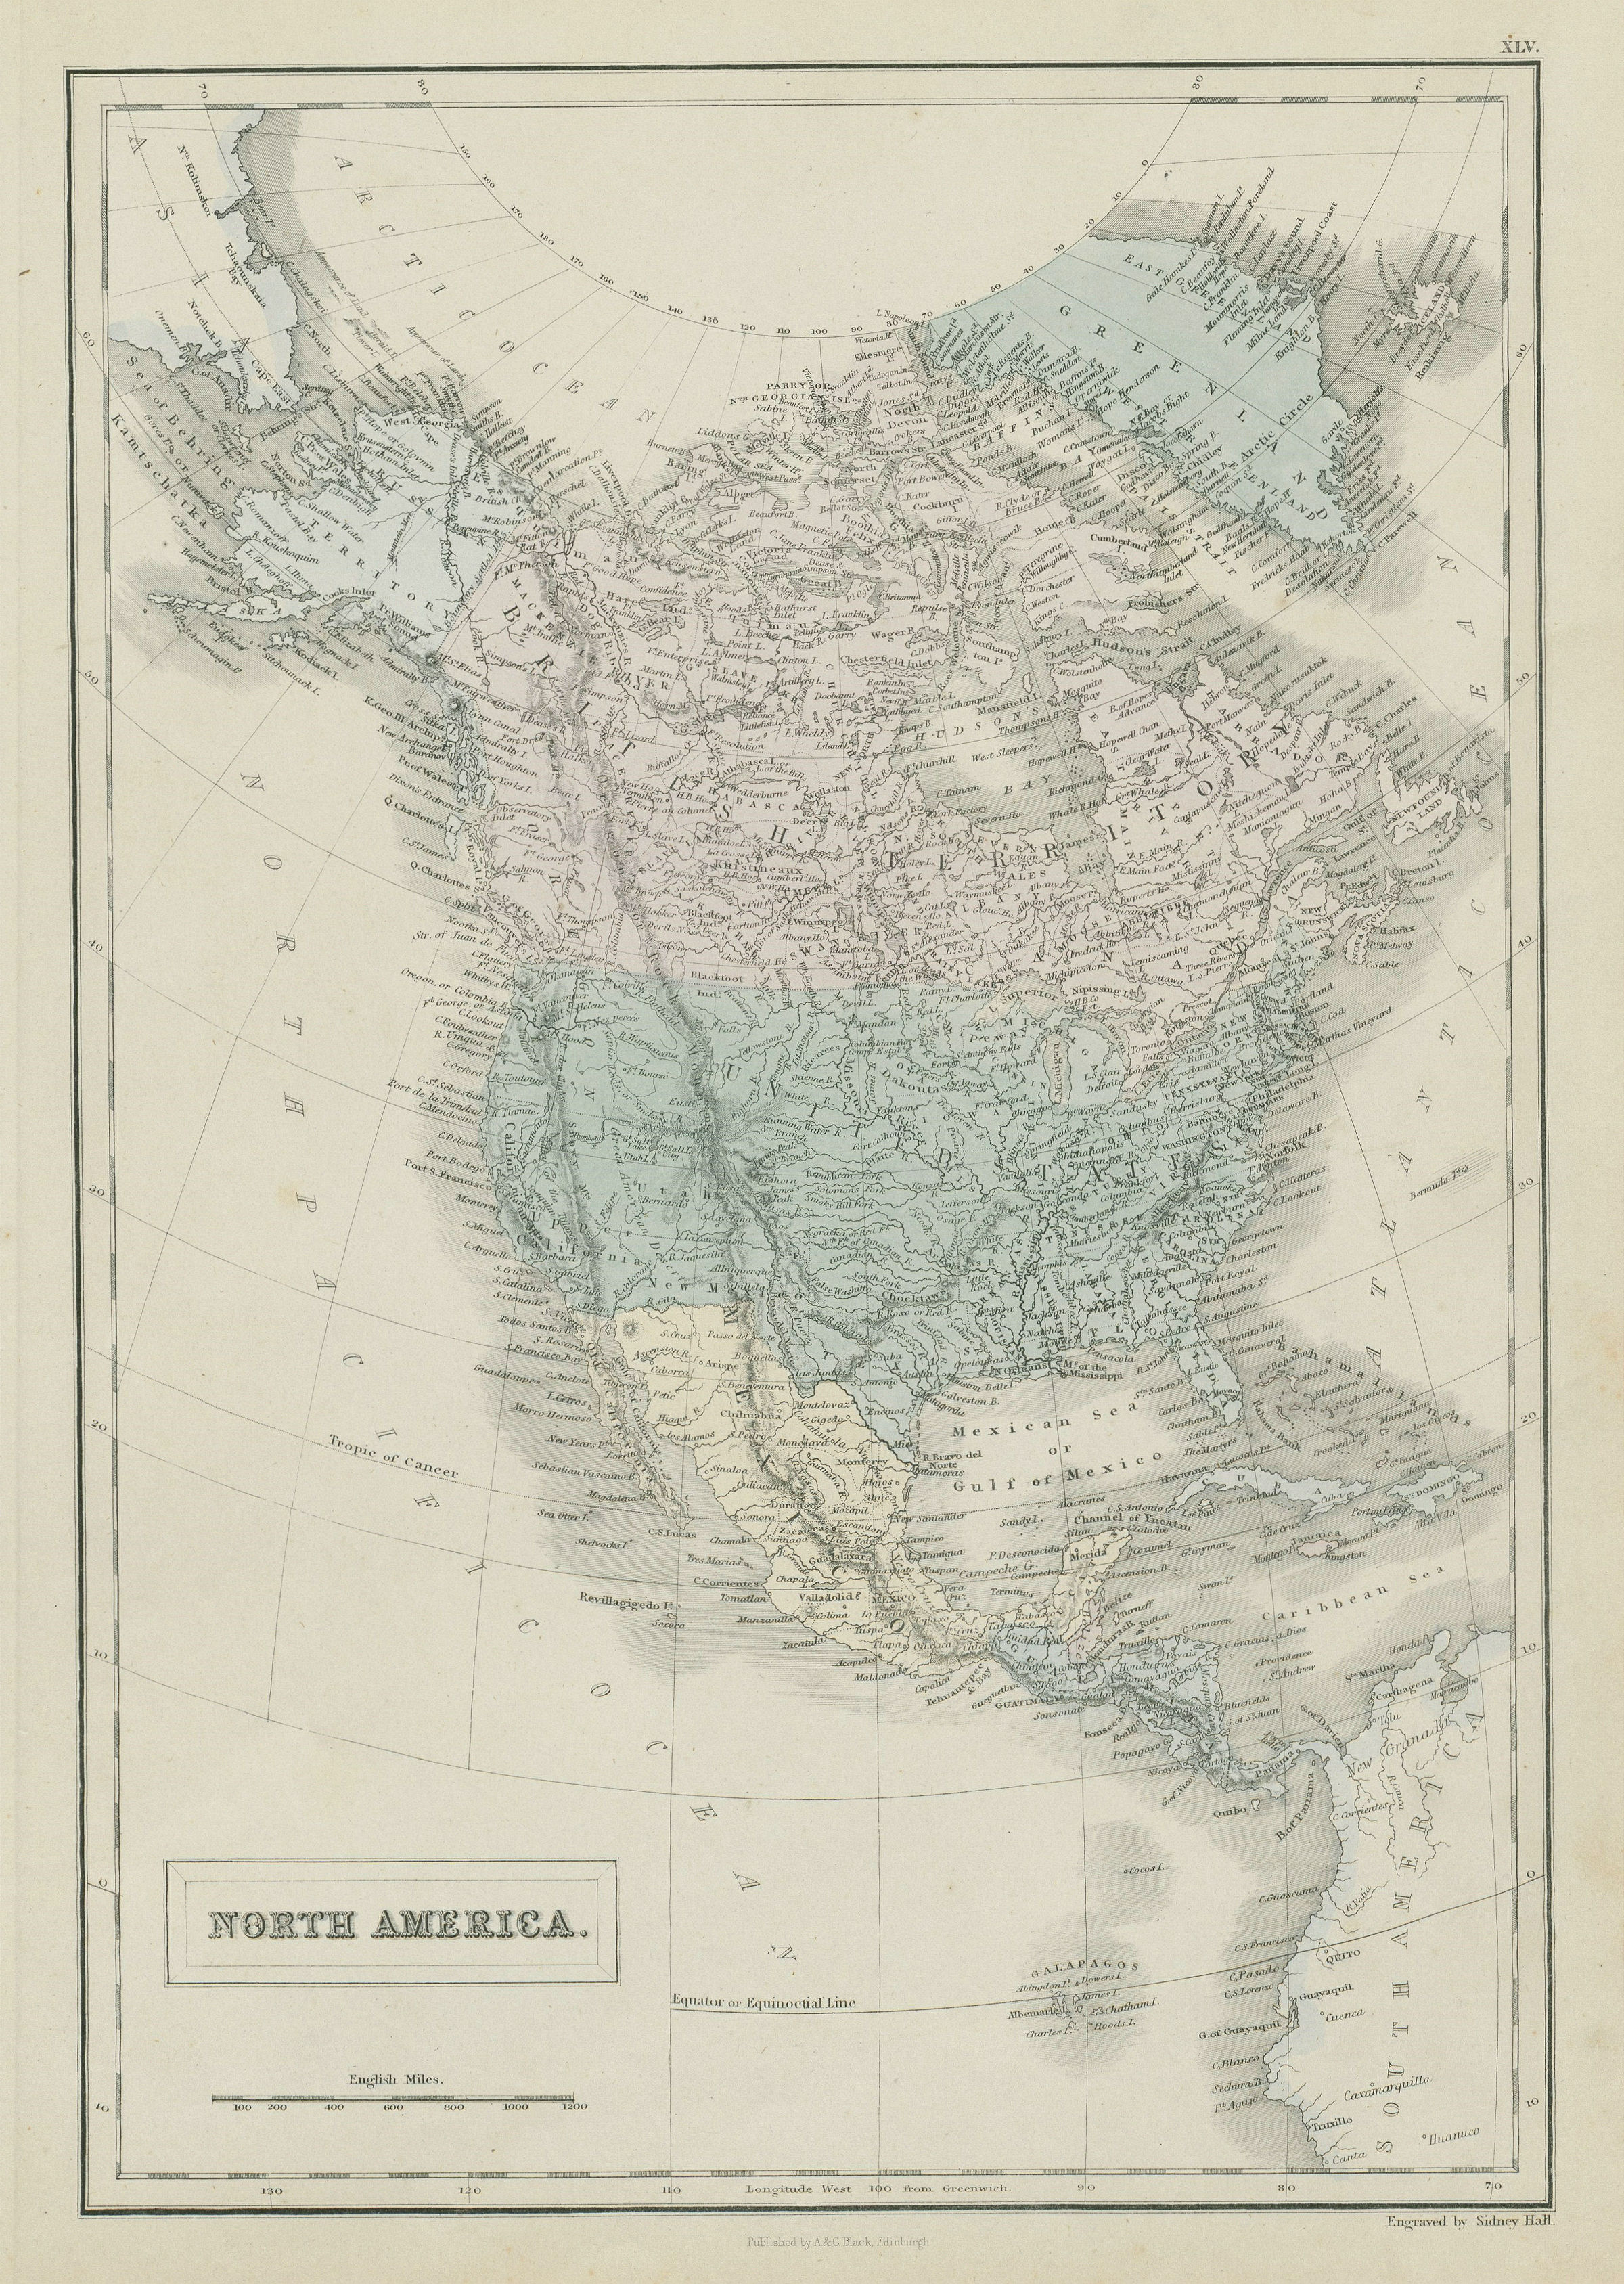 Associate Product North America. Russian Alaska. US 31 states. SIDNEY HALL 1856 old antique map